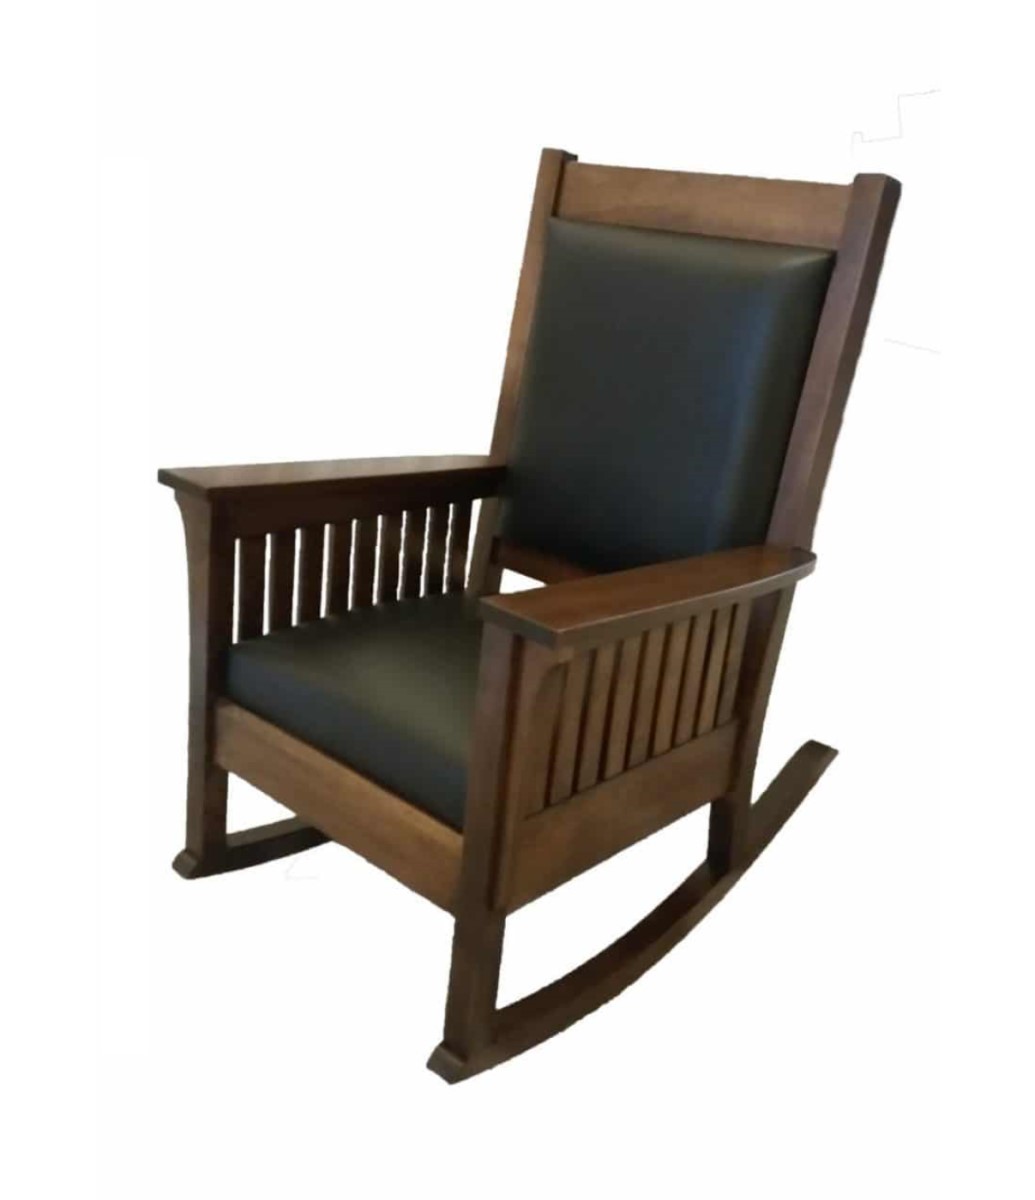 Affinity Mission Rocking Chair Amrc, Black Leather Rocking Chair